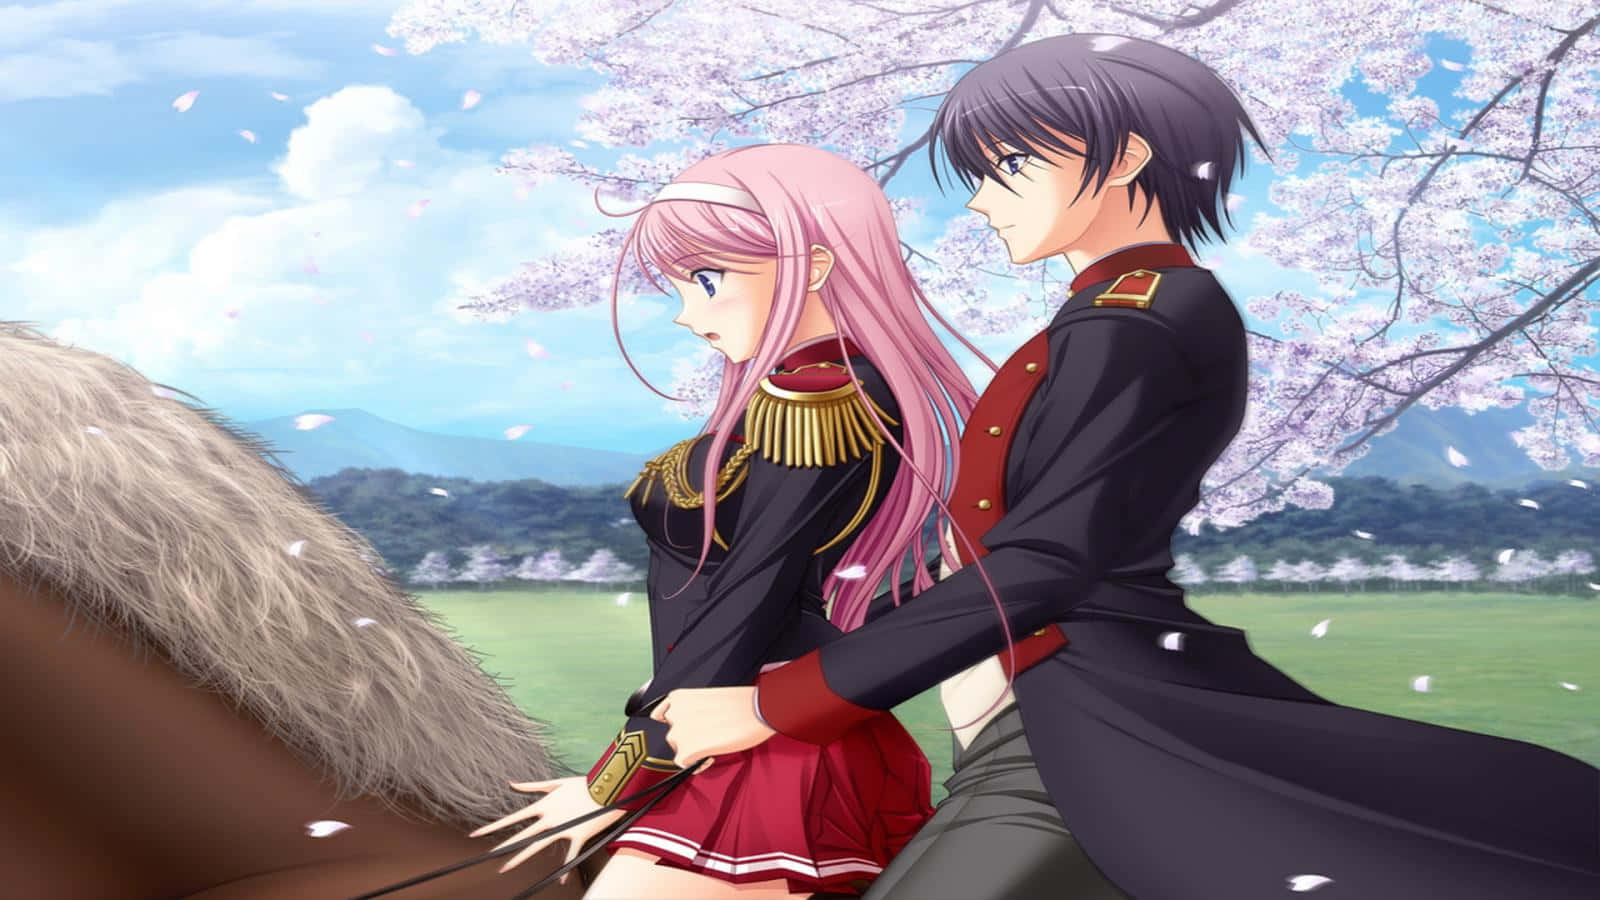 Download Kira And Lacus Riding Horse Romance Anime Wallpaper ...